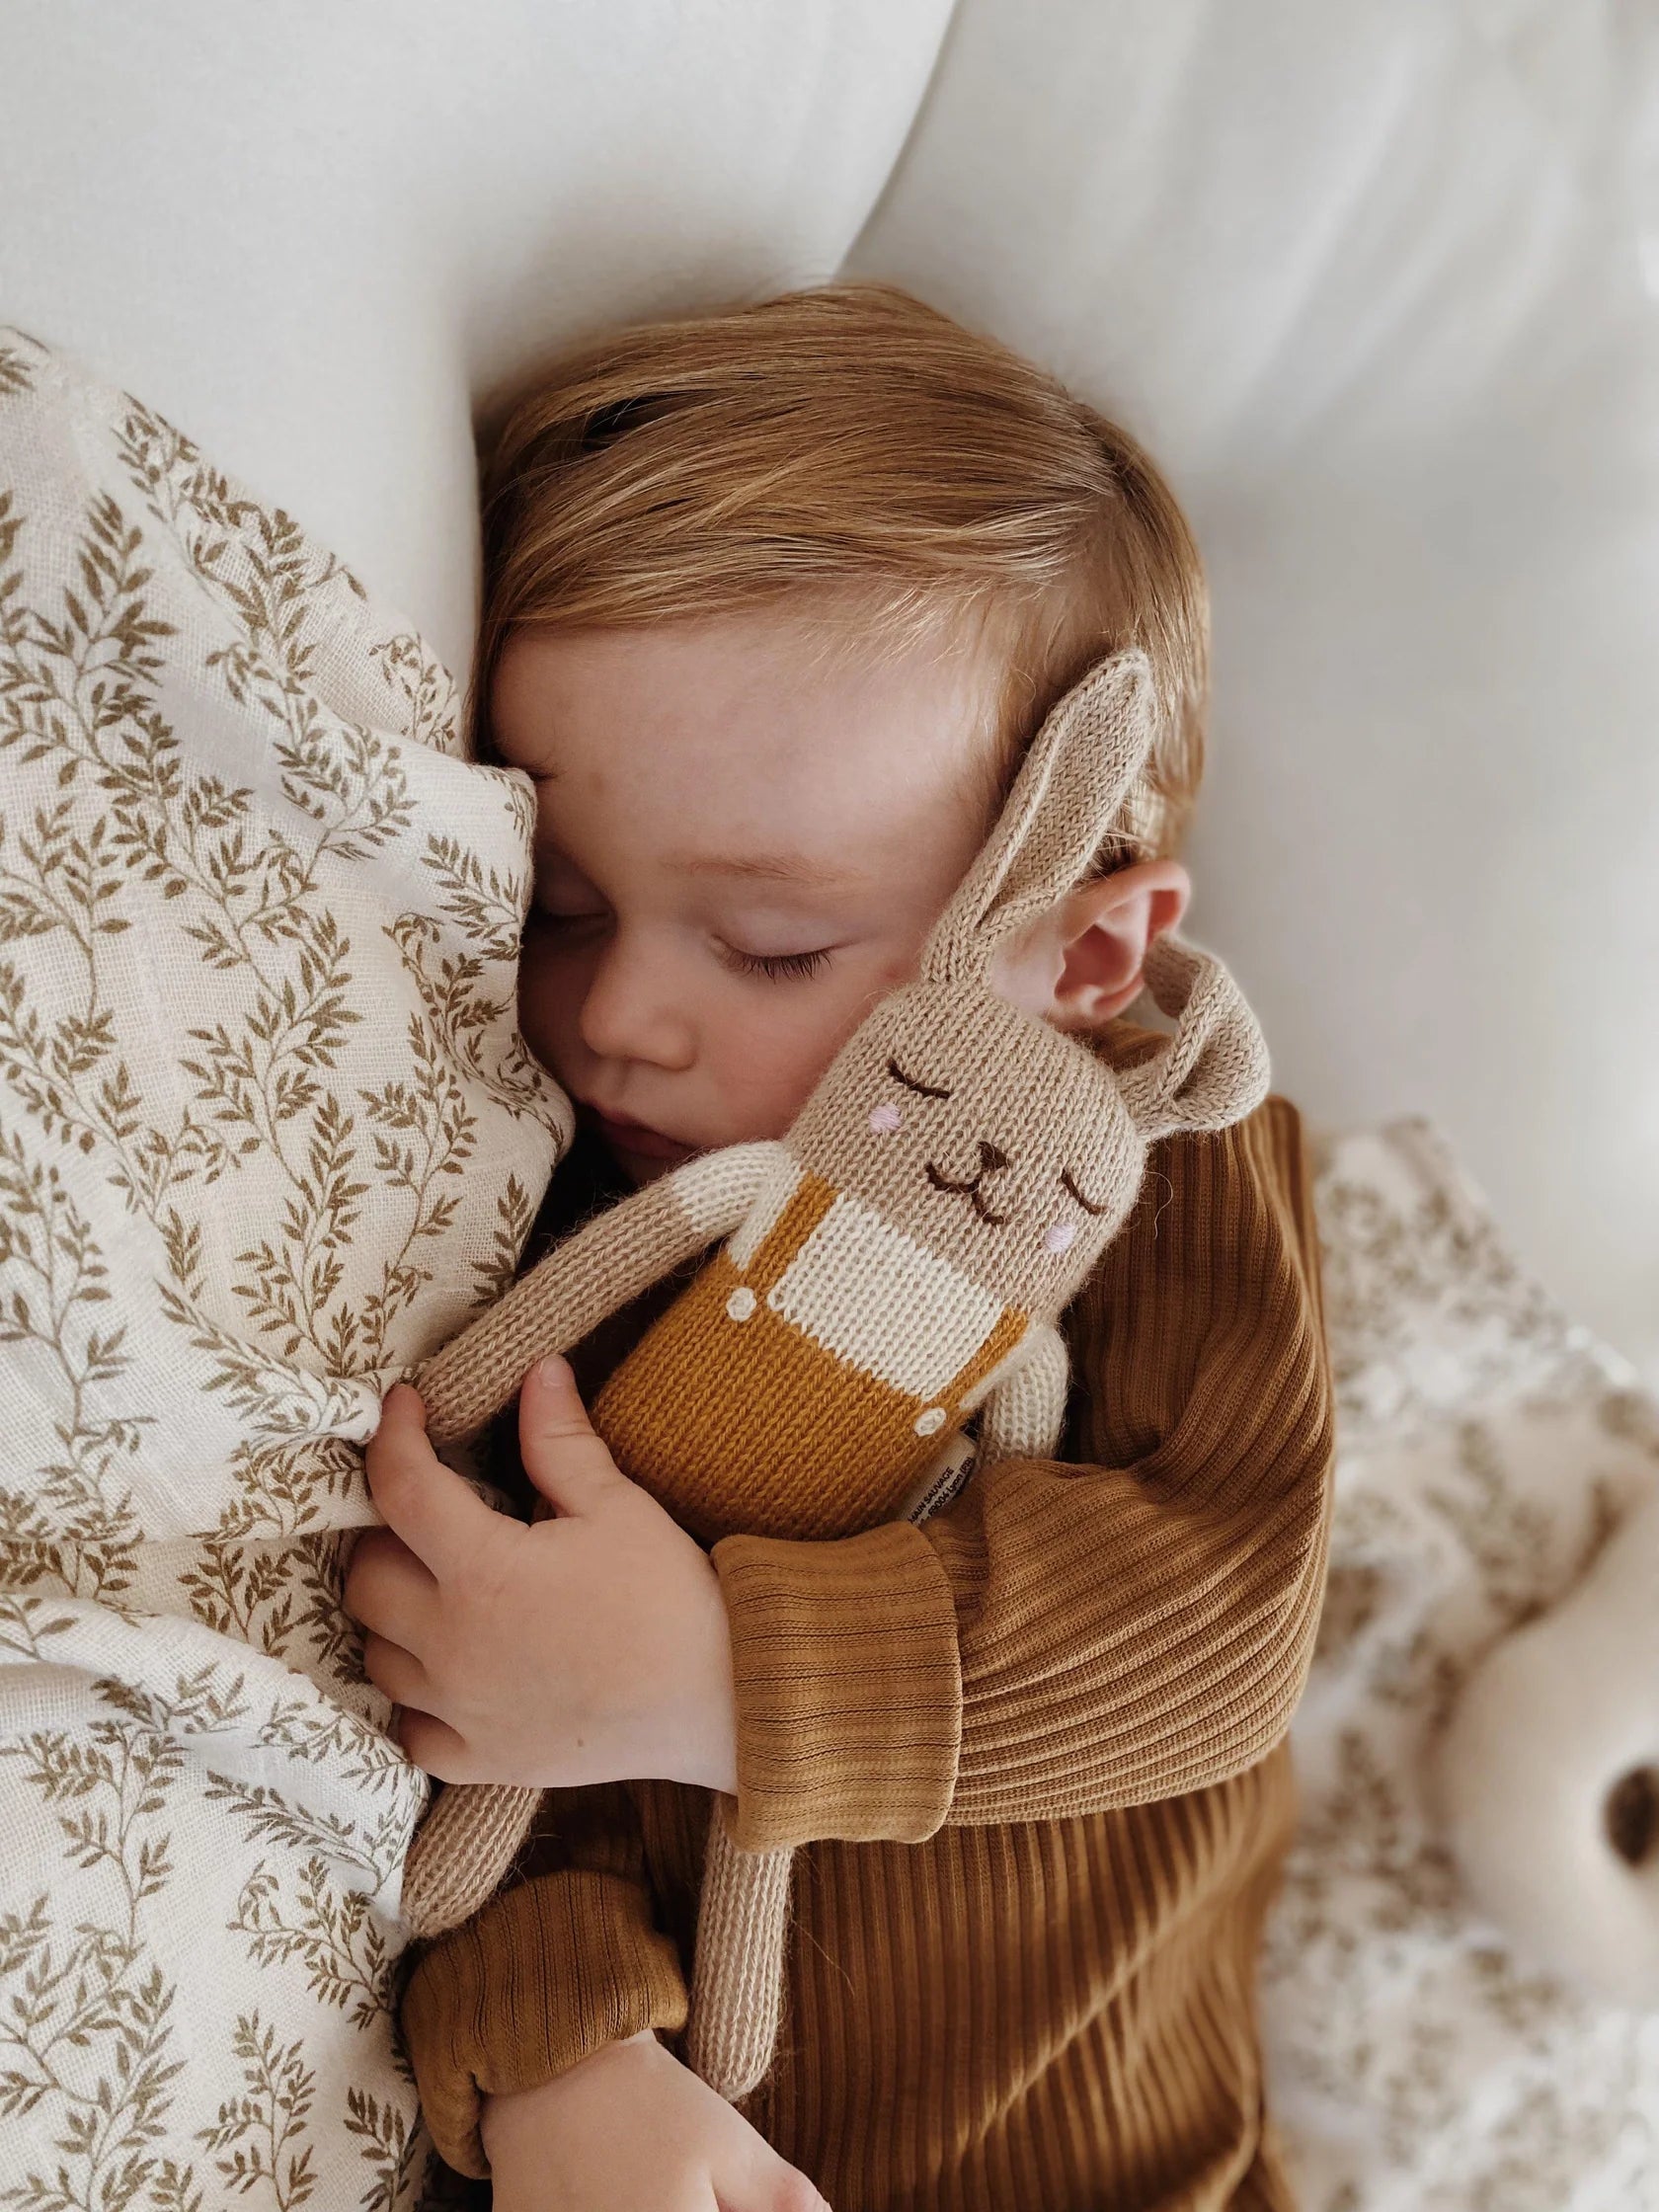 main-sauvage-bunny-knitted-soft-toy-ochre-overalls-hello-little-birdie-3_6685cd0c-fdca-42f3-bc64-8d5c2765b289_1680x.jpg-2.webp